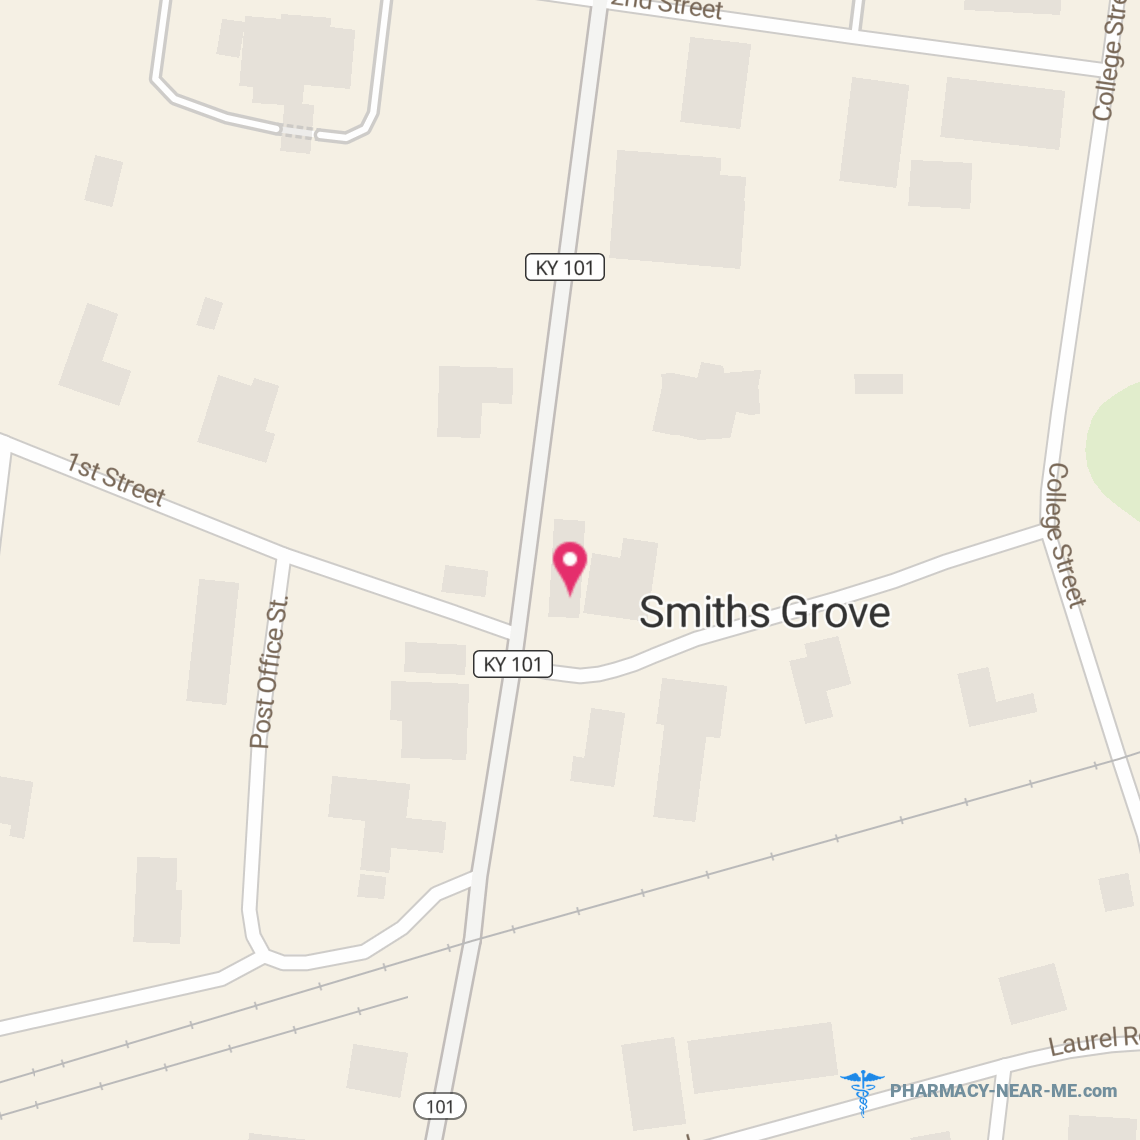 SMITHS GROVE PRESCRIPTION SHOP - Pharmacy Hours, Phone, Reviews & Information: 111 North Main Street, Smiths Grove, Kentucky 42171, United States